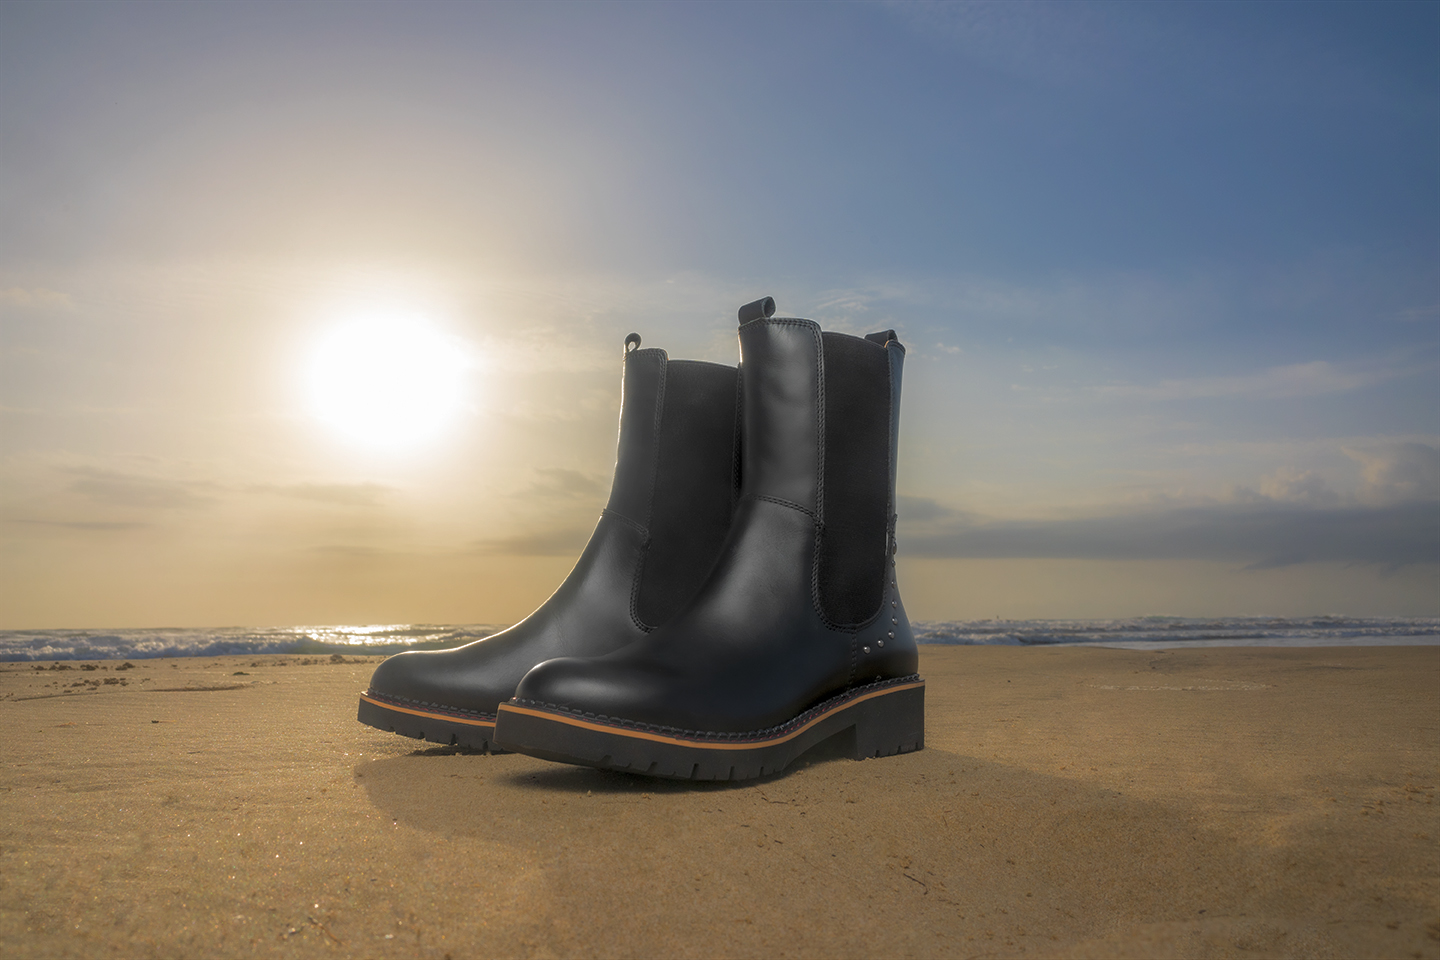 Image of Pikolinos women's boots in black on the beach sand.